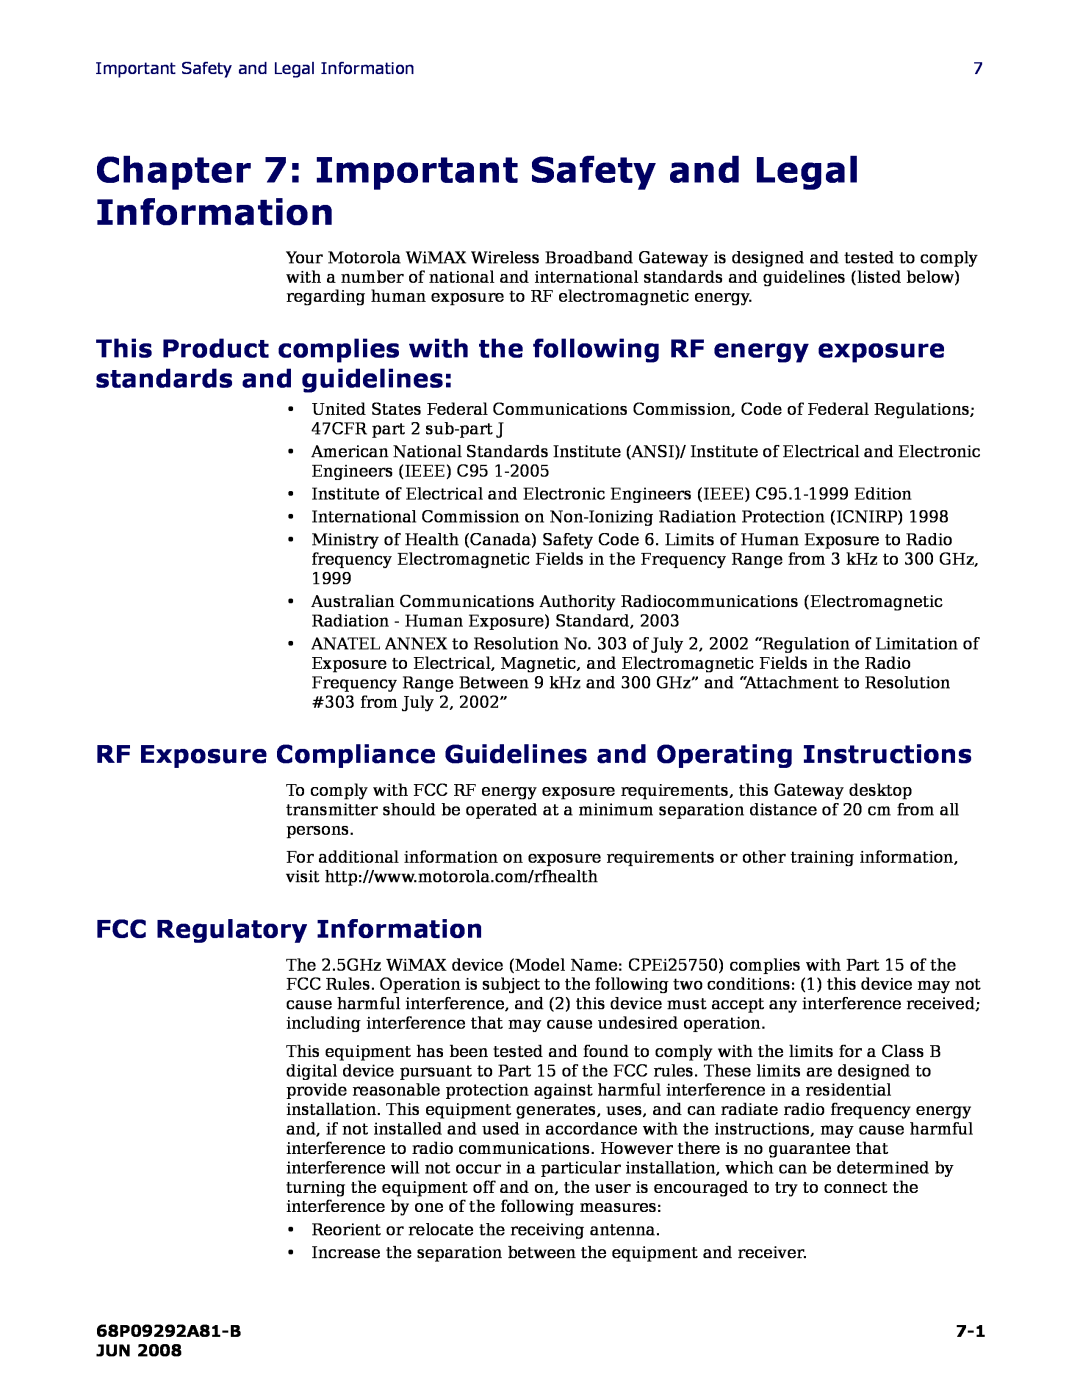 Motorola CPEI 750 Important Safety and Legal Information, RF Exposure Compliance Guidelines and Operating Instructions 